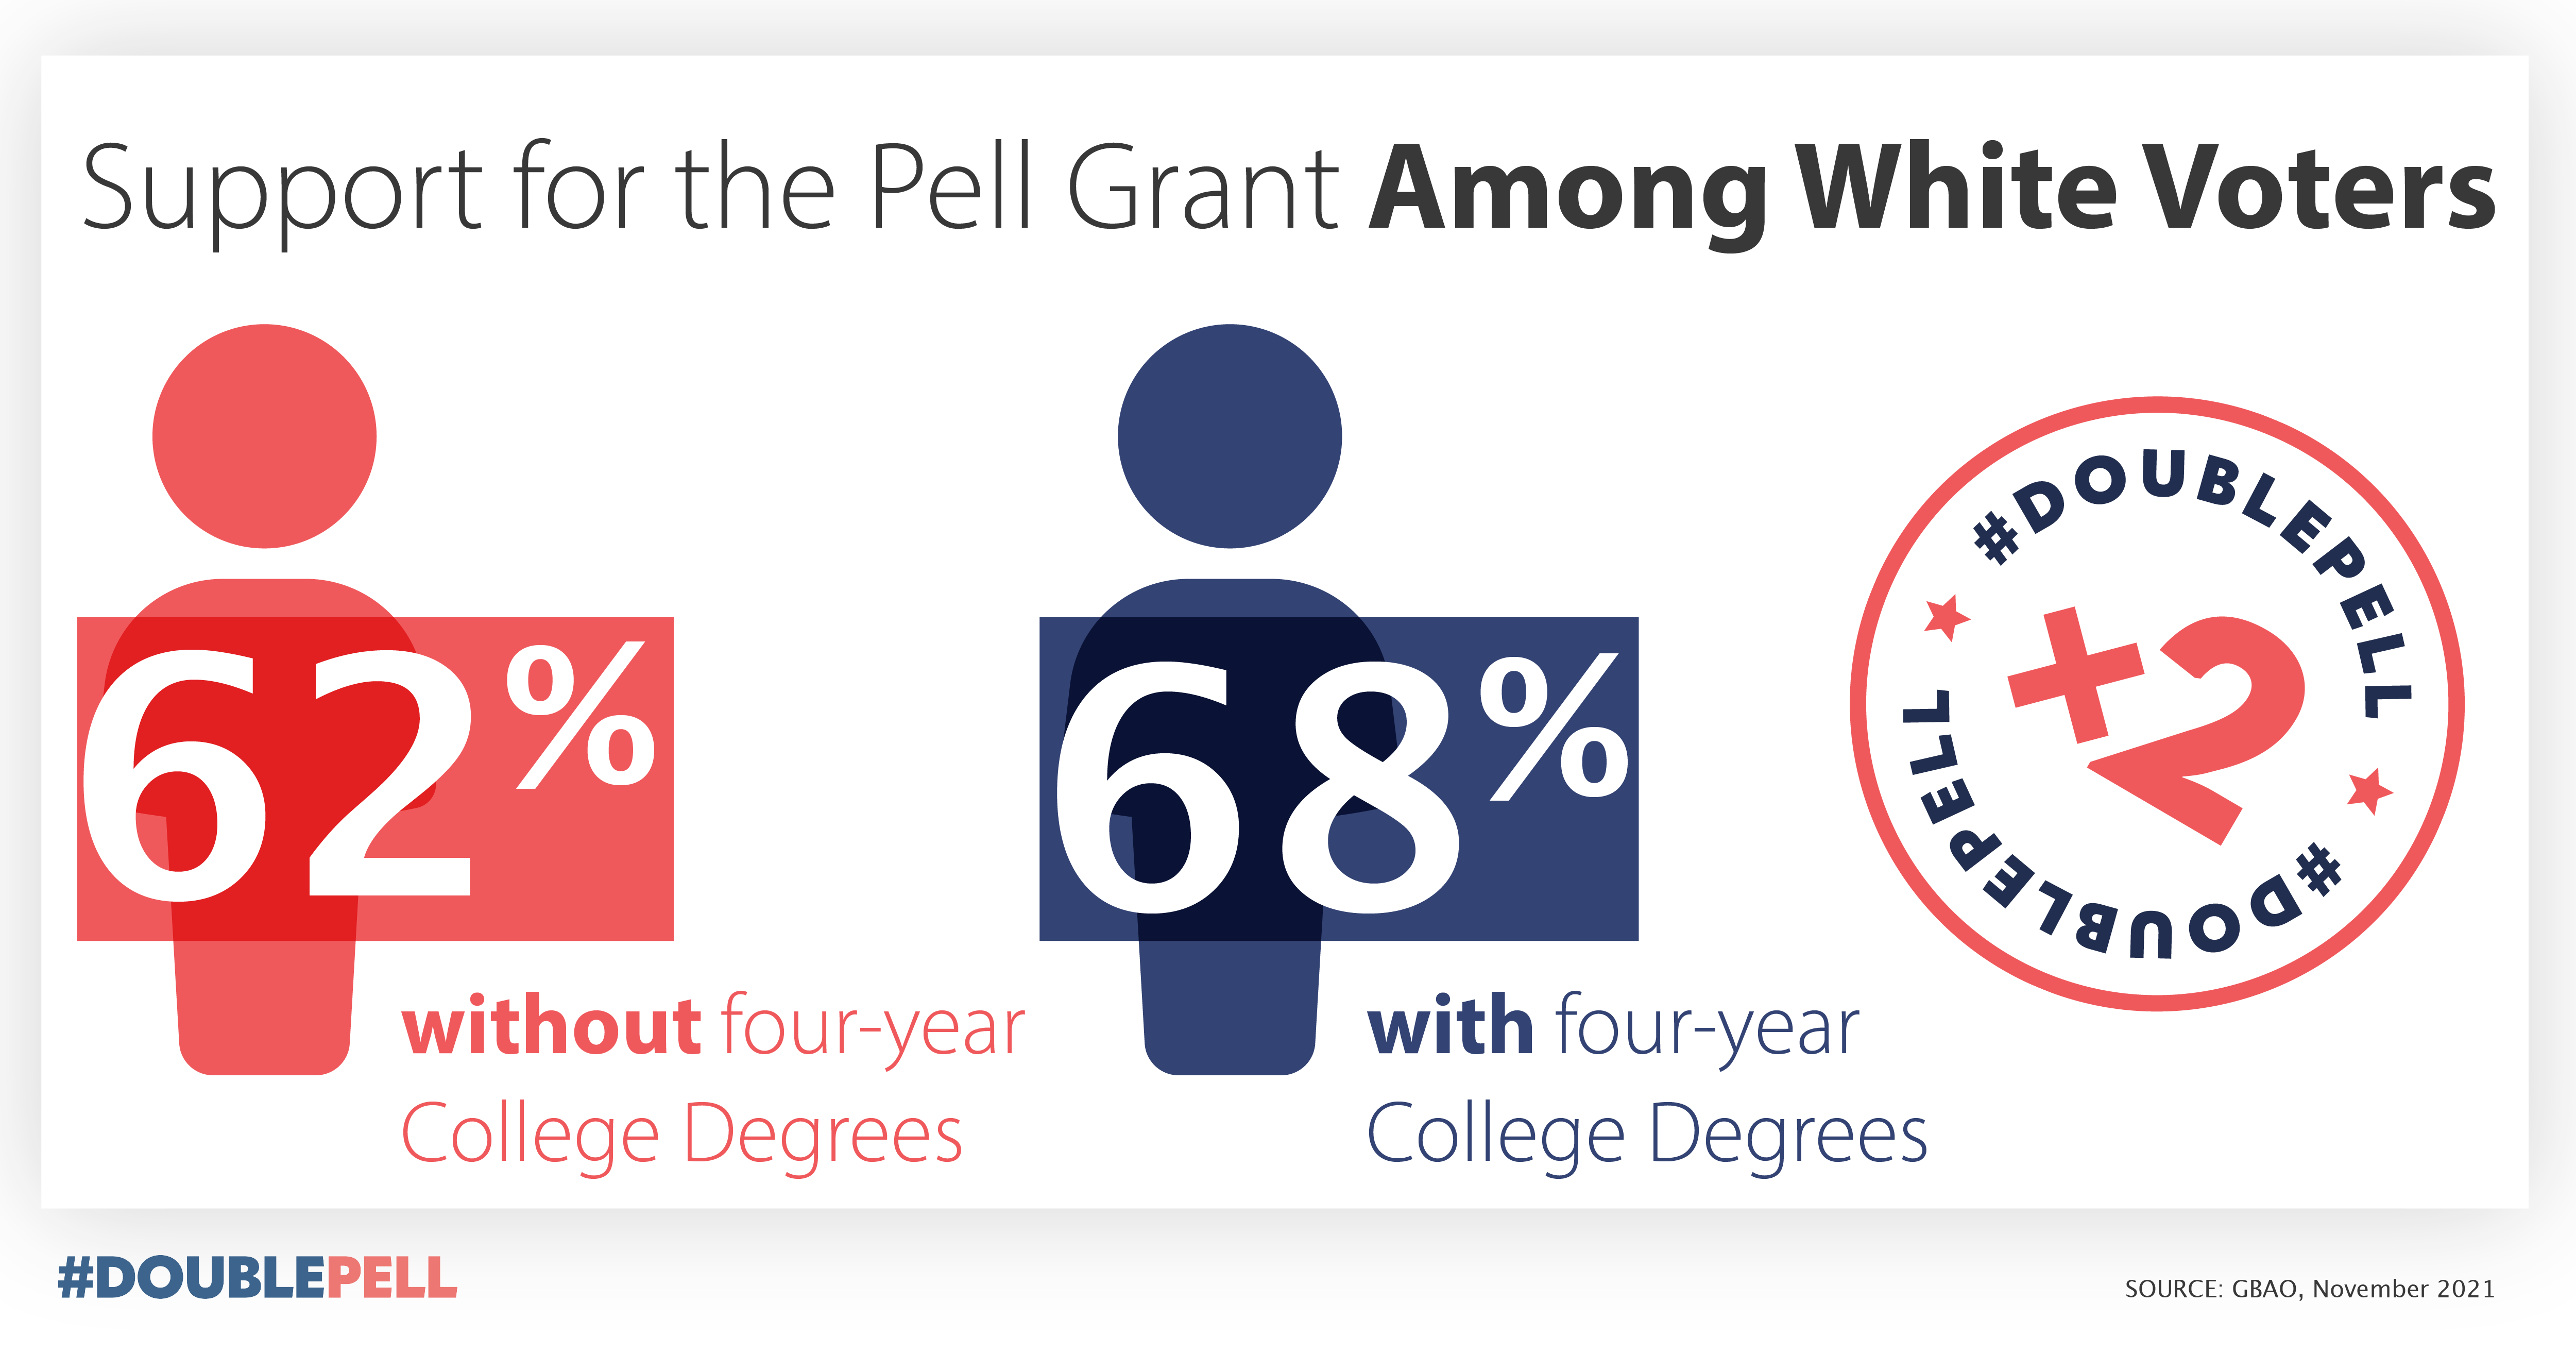 Support among white voter for Pell Grant graphic